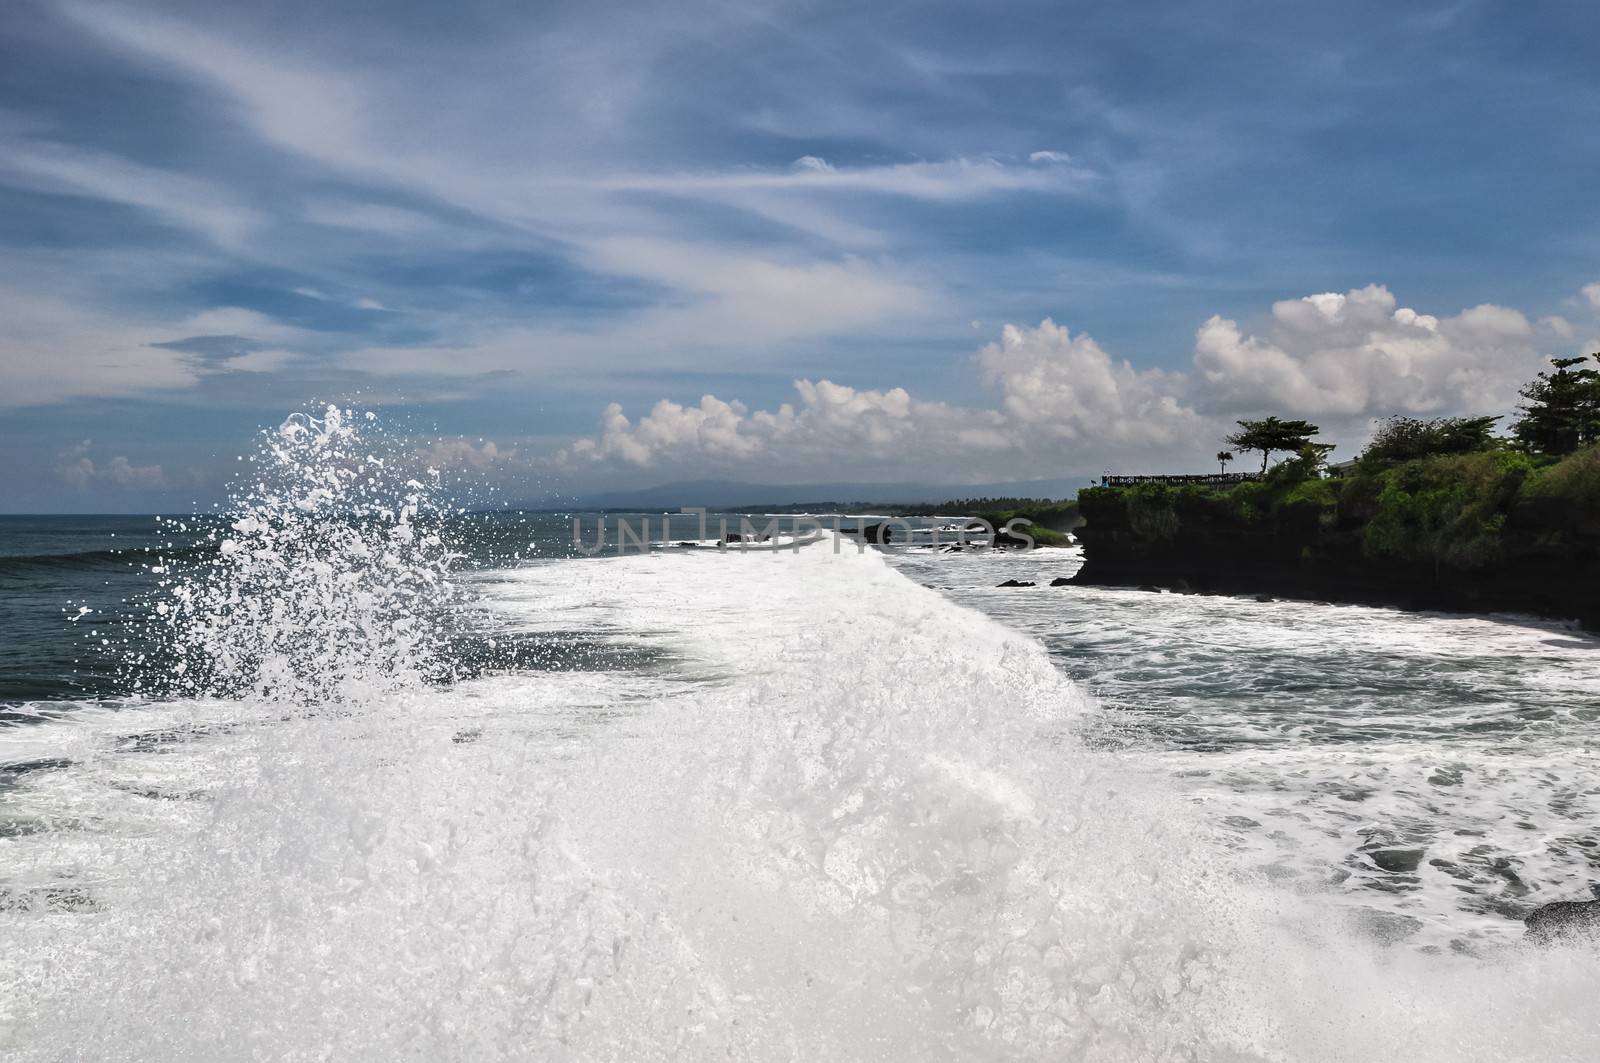 Tanah Lot temple Complex, in Bali island by weltreisendertj